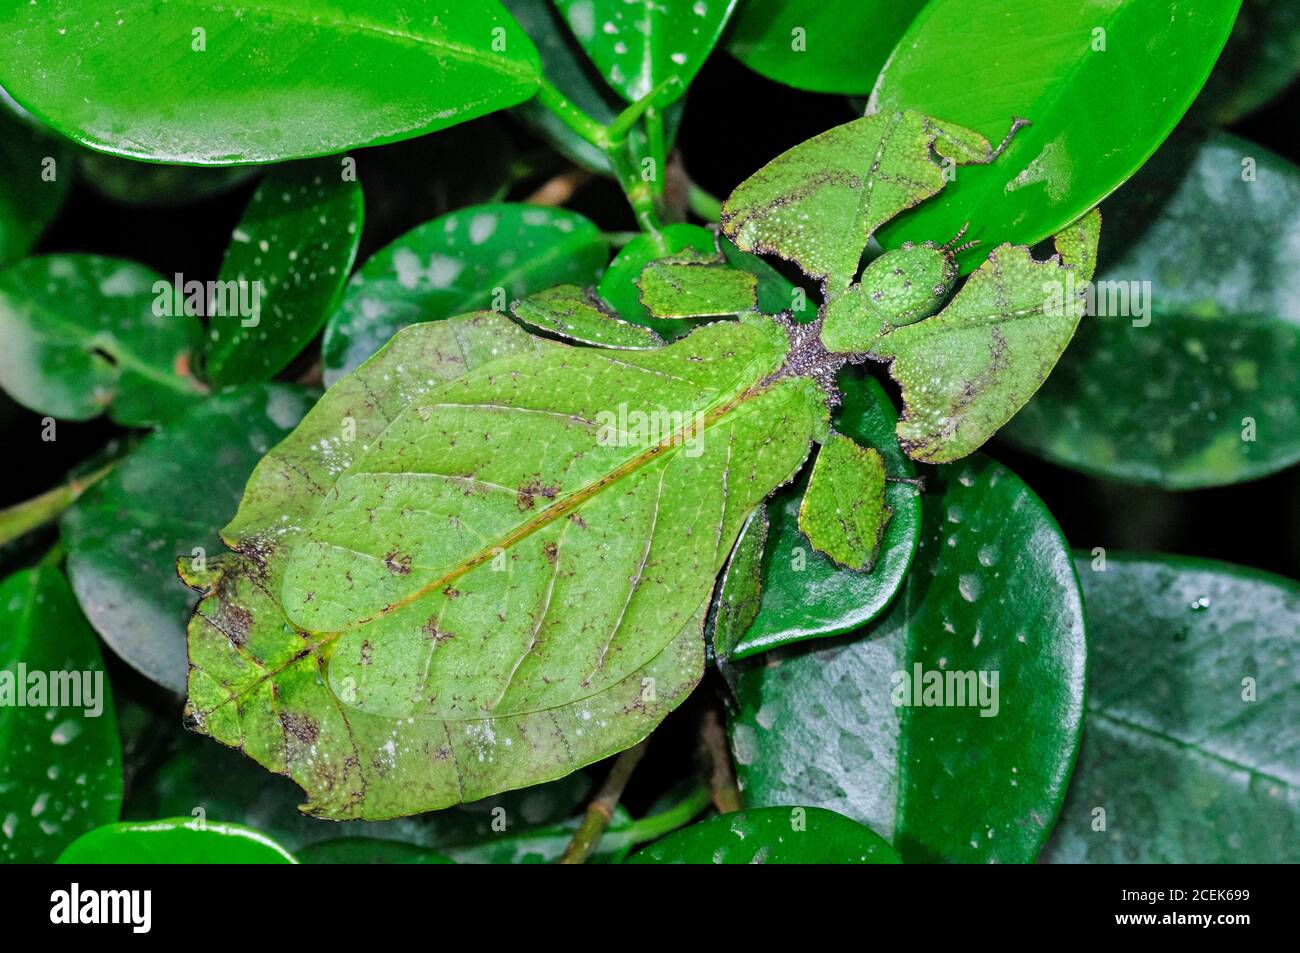 giant leaf insect, Phyllium giganteum, being camouflaged (using mimicry) to take on the appearance of leaves, Cameron Highlands, Malaysia Stock Photo